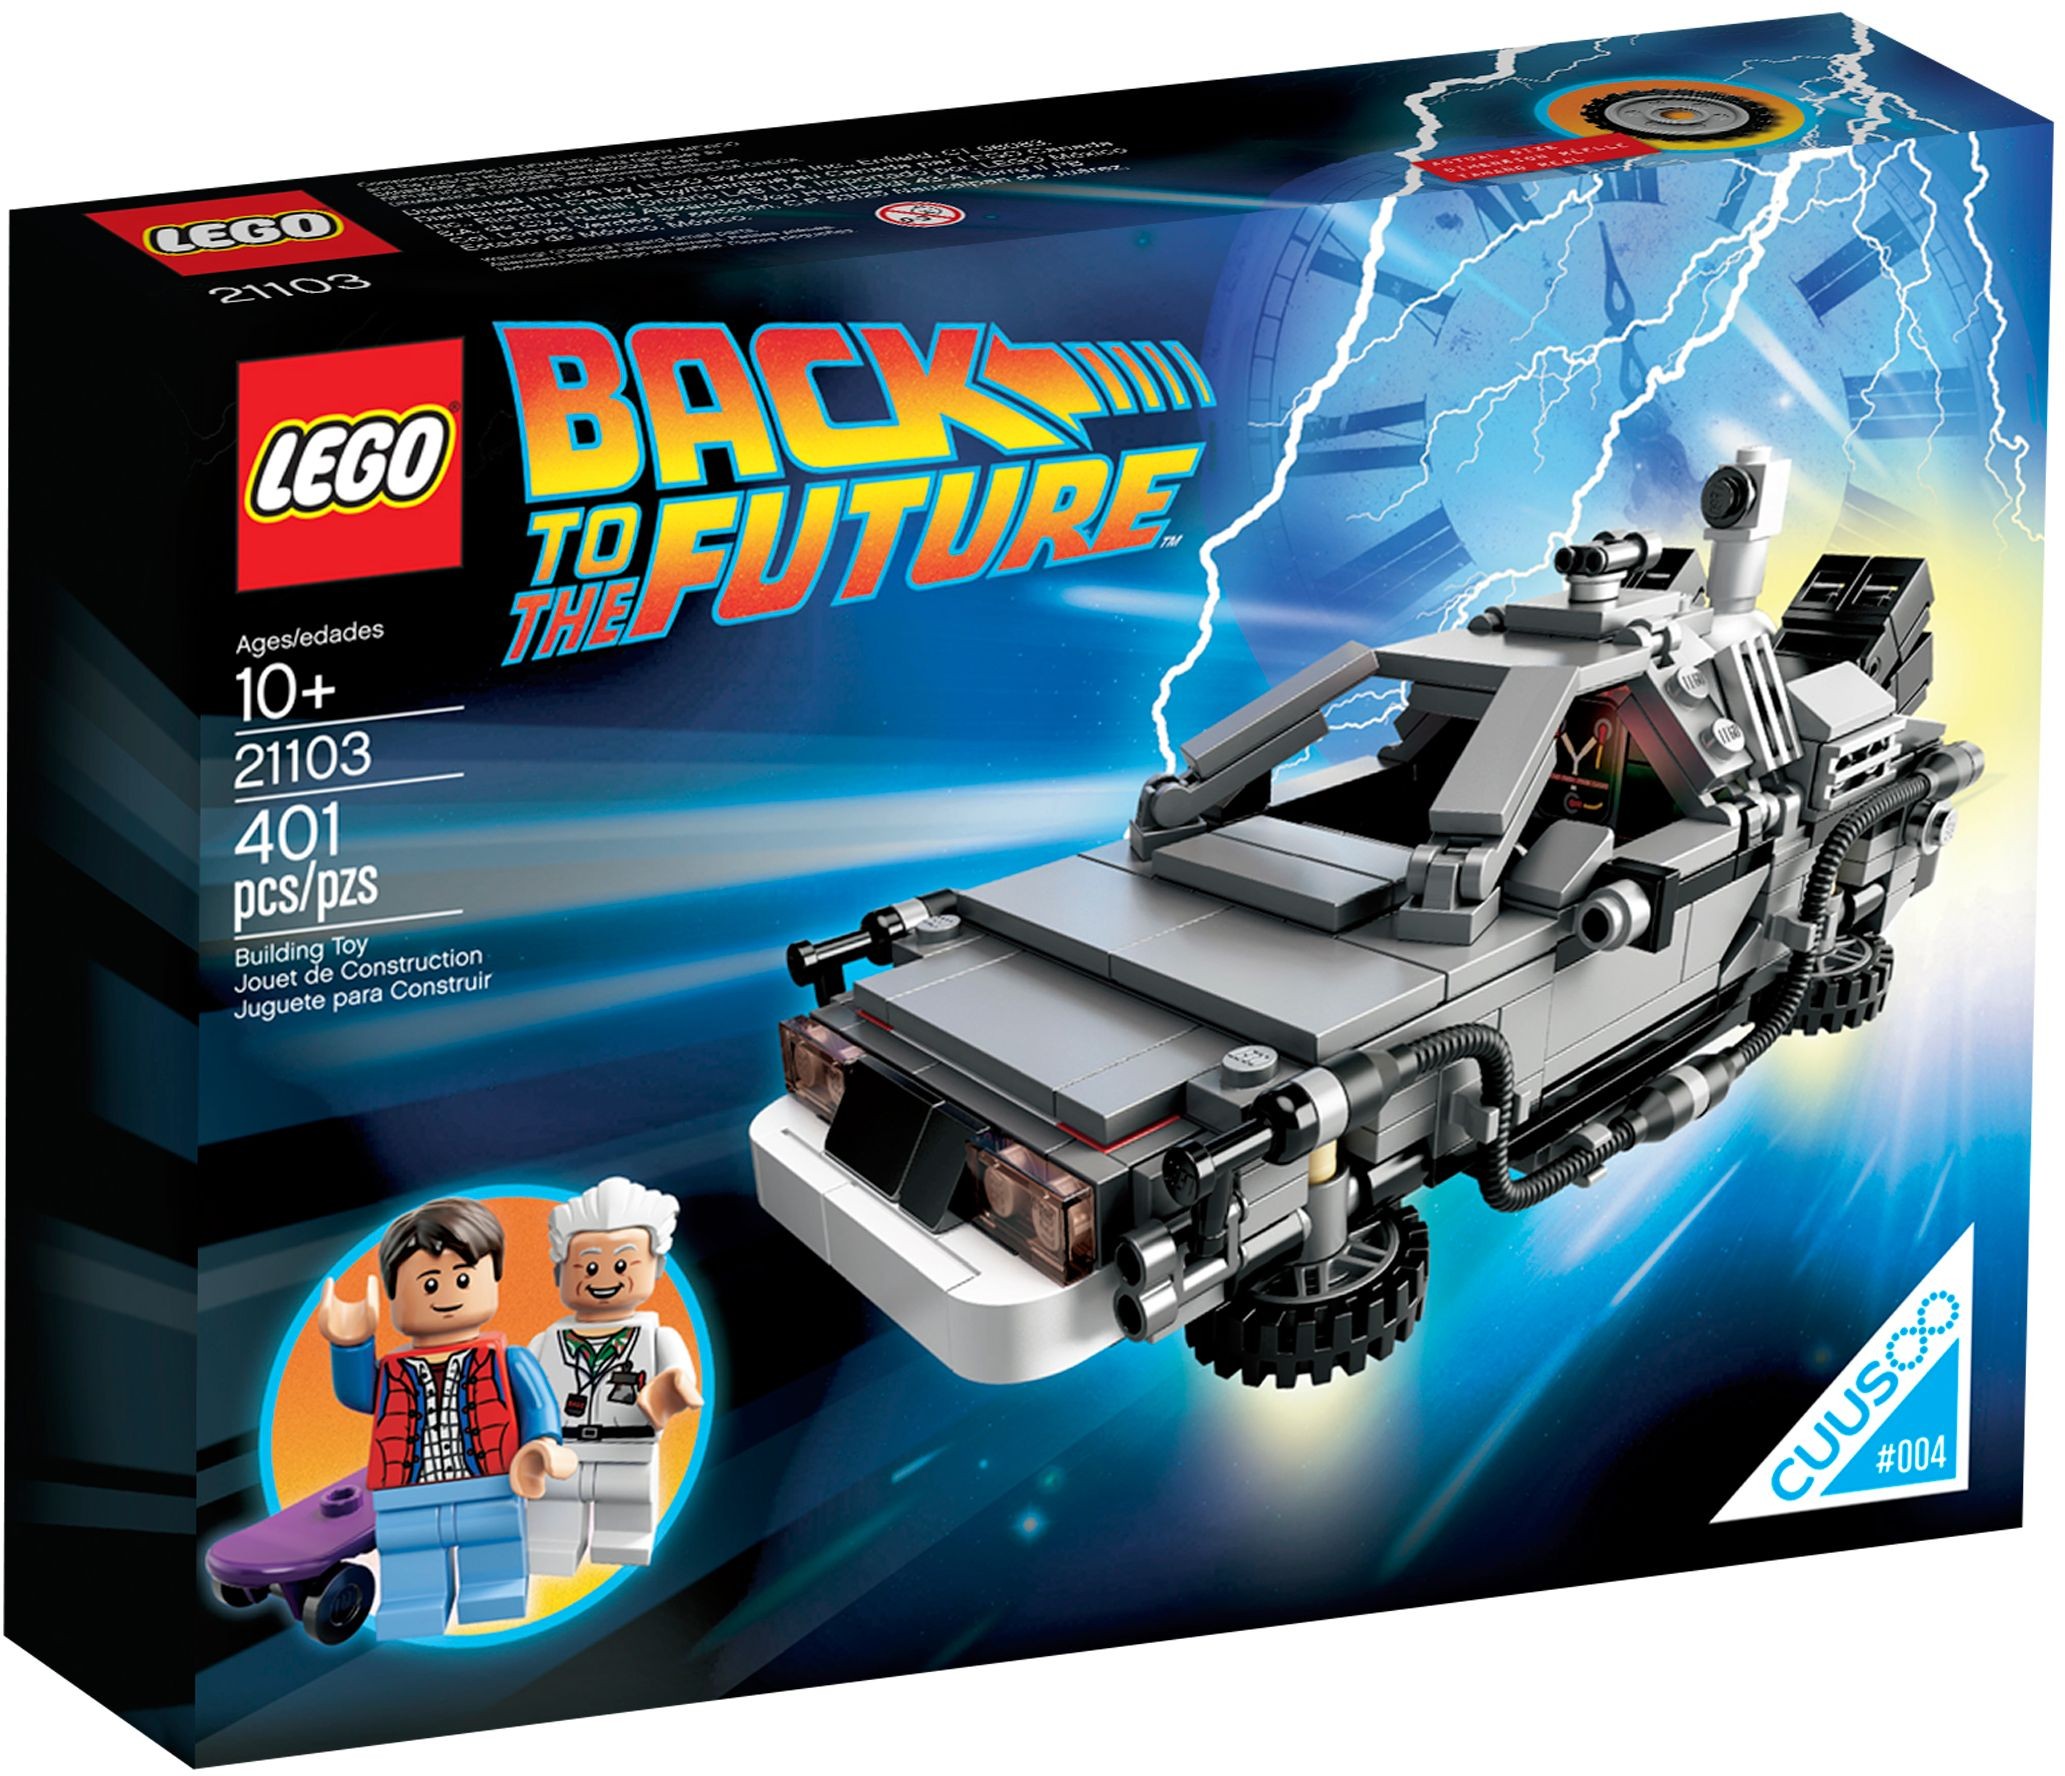 LEGO Back to the Future DeLorean Rumored for September Release - The Brick  Fan